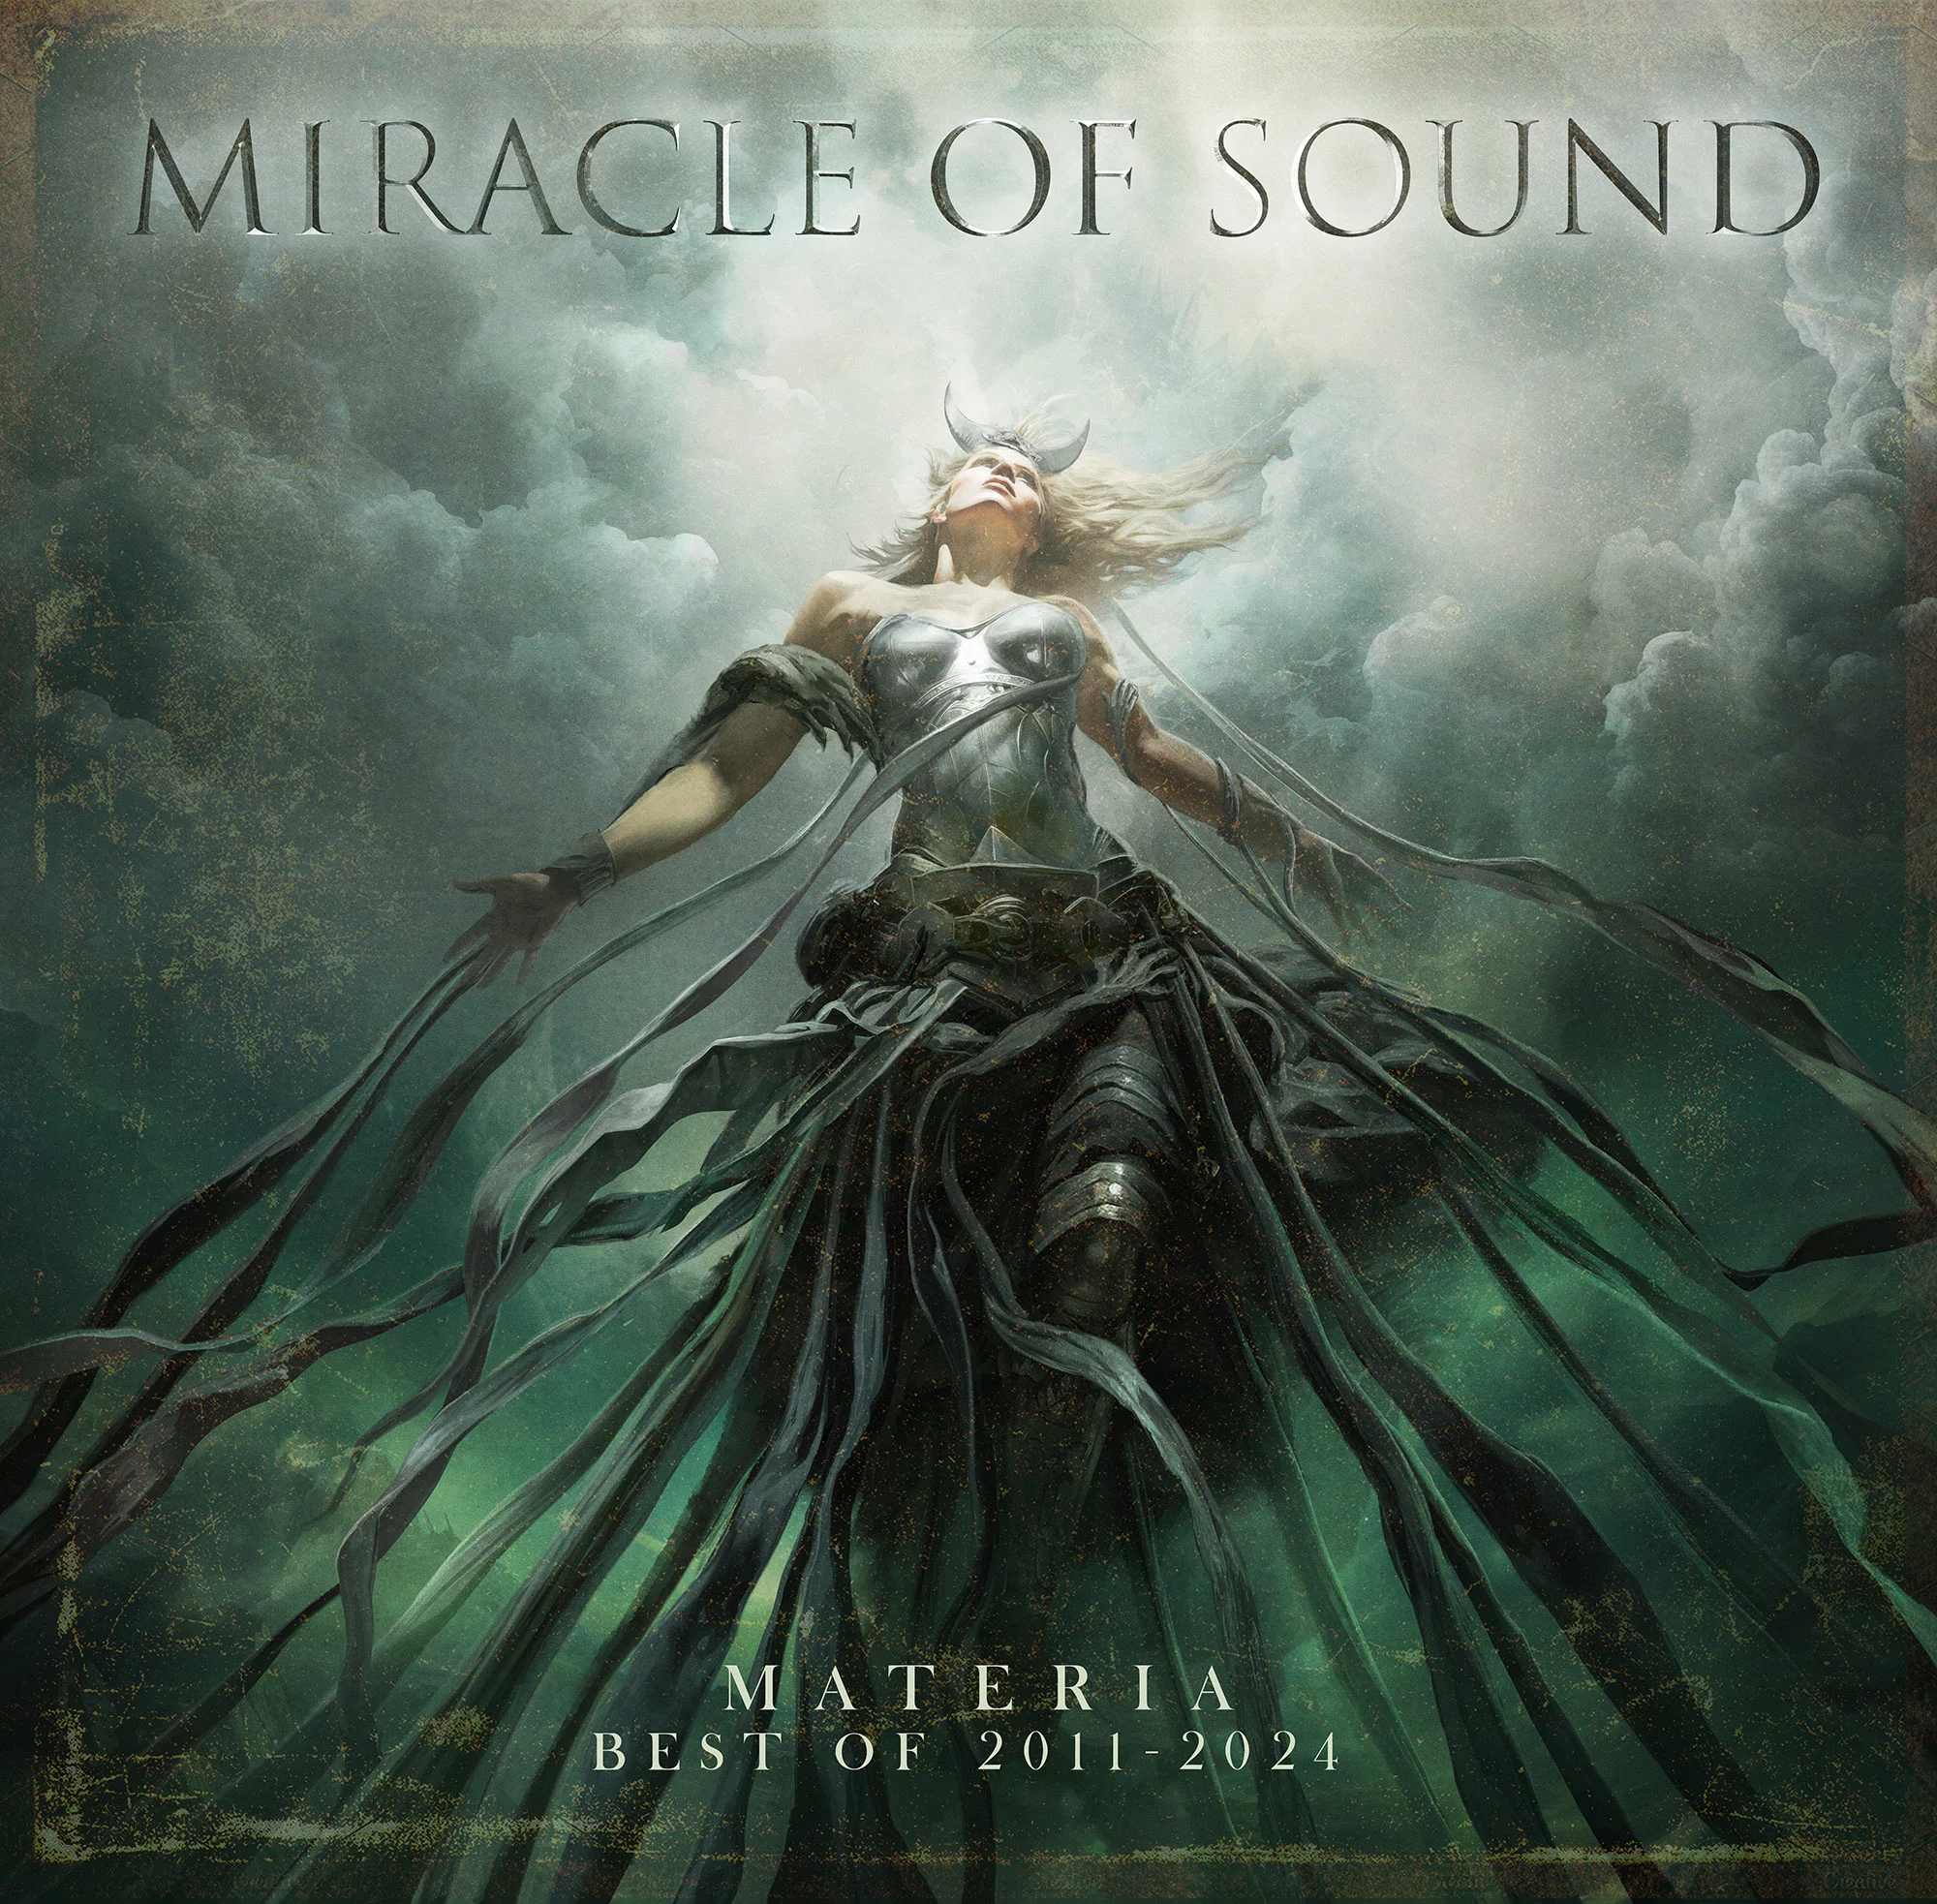 MIRACLE OF SOUND - Materia Best Of 2011 - 2024 [DIGIPAK CD]